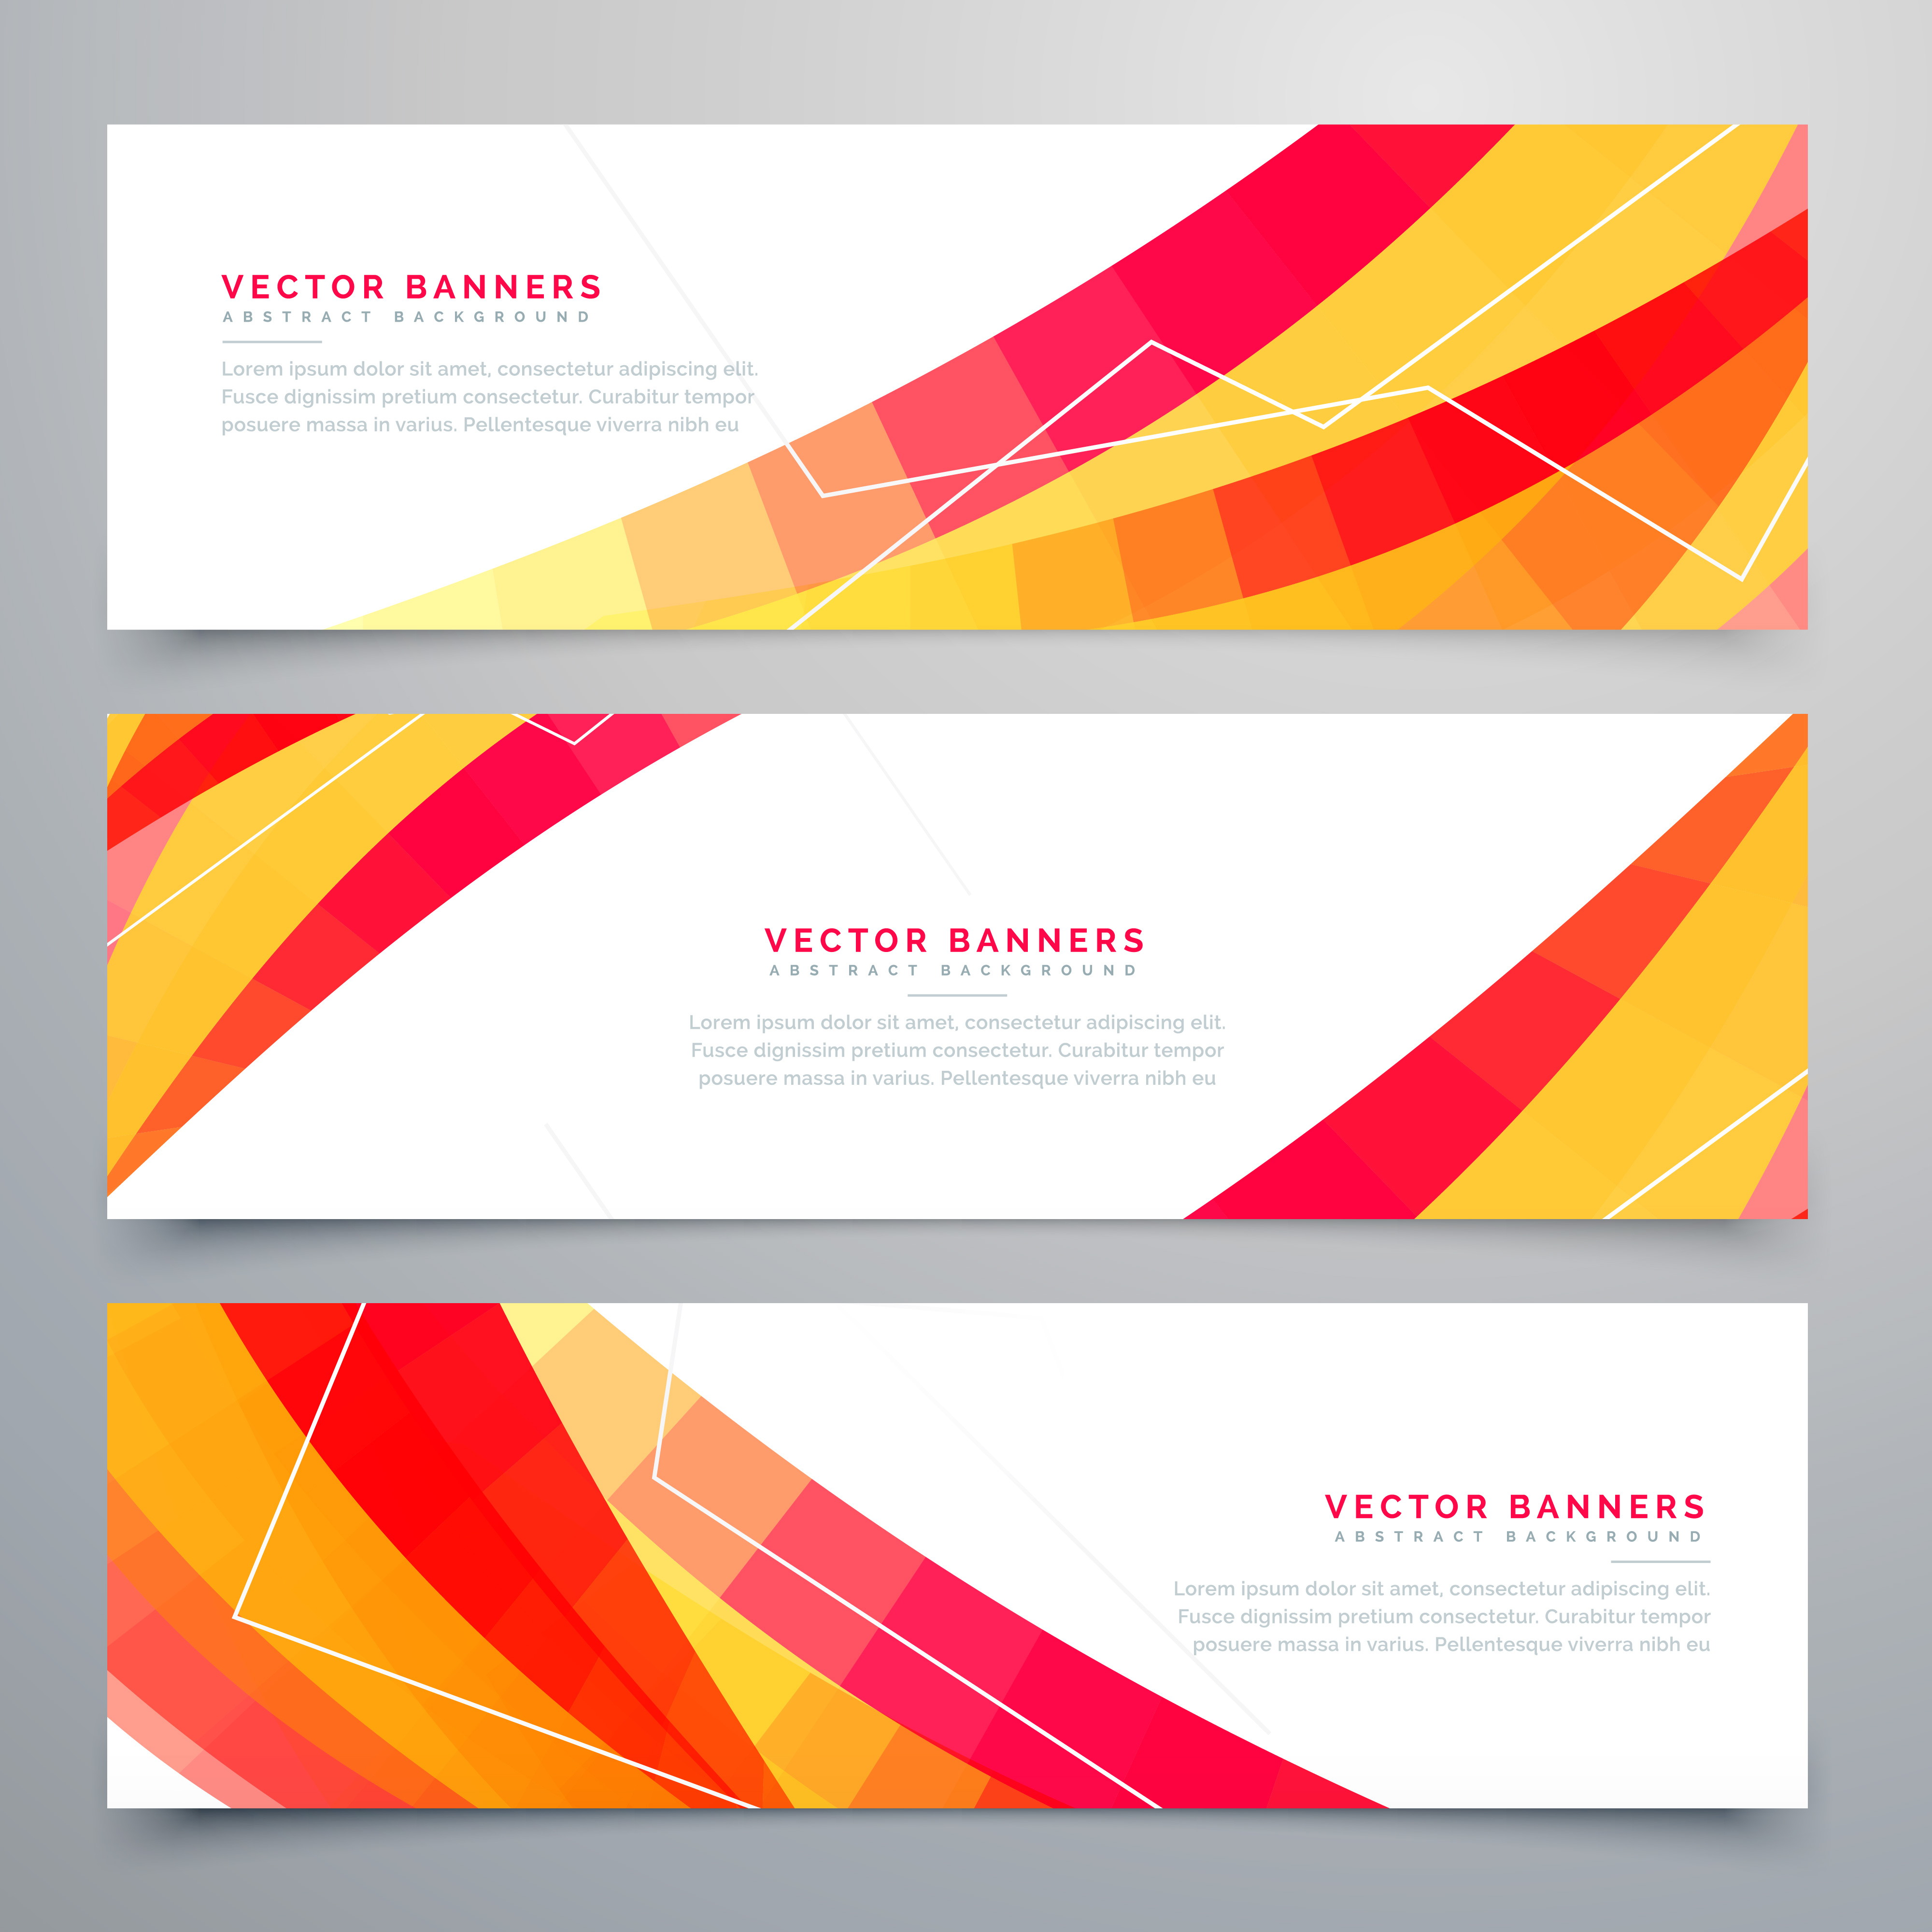 Awesome Set Of Colorful Abstract Banners Design Download Free Vector